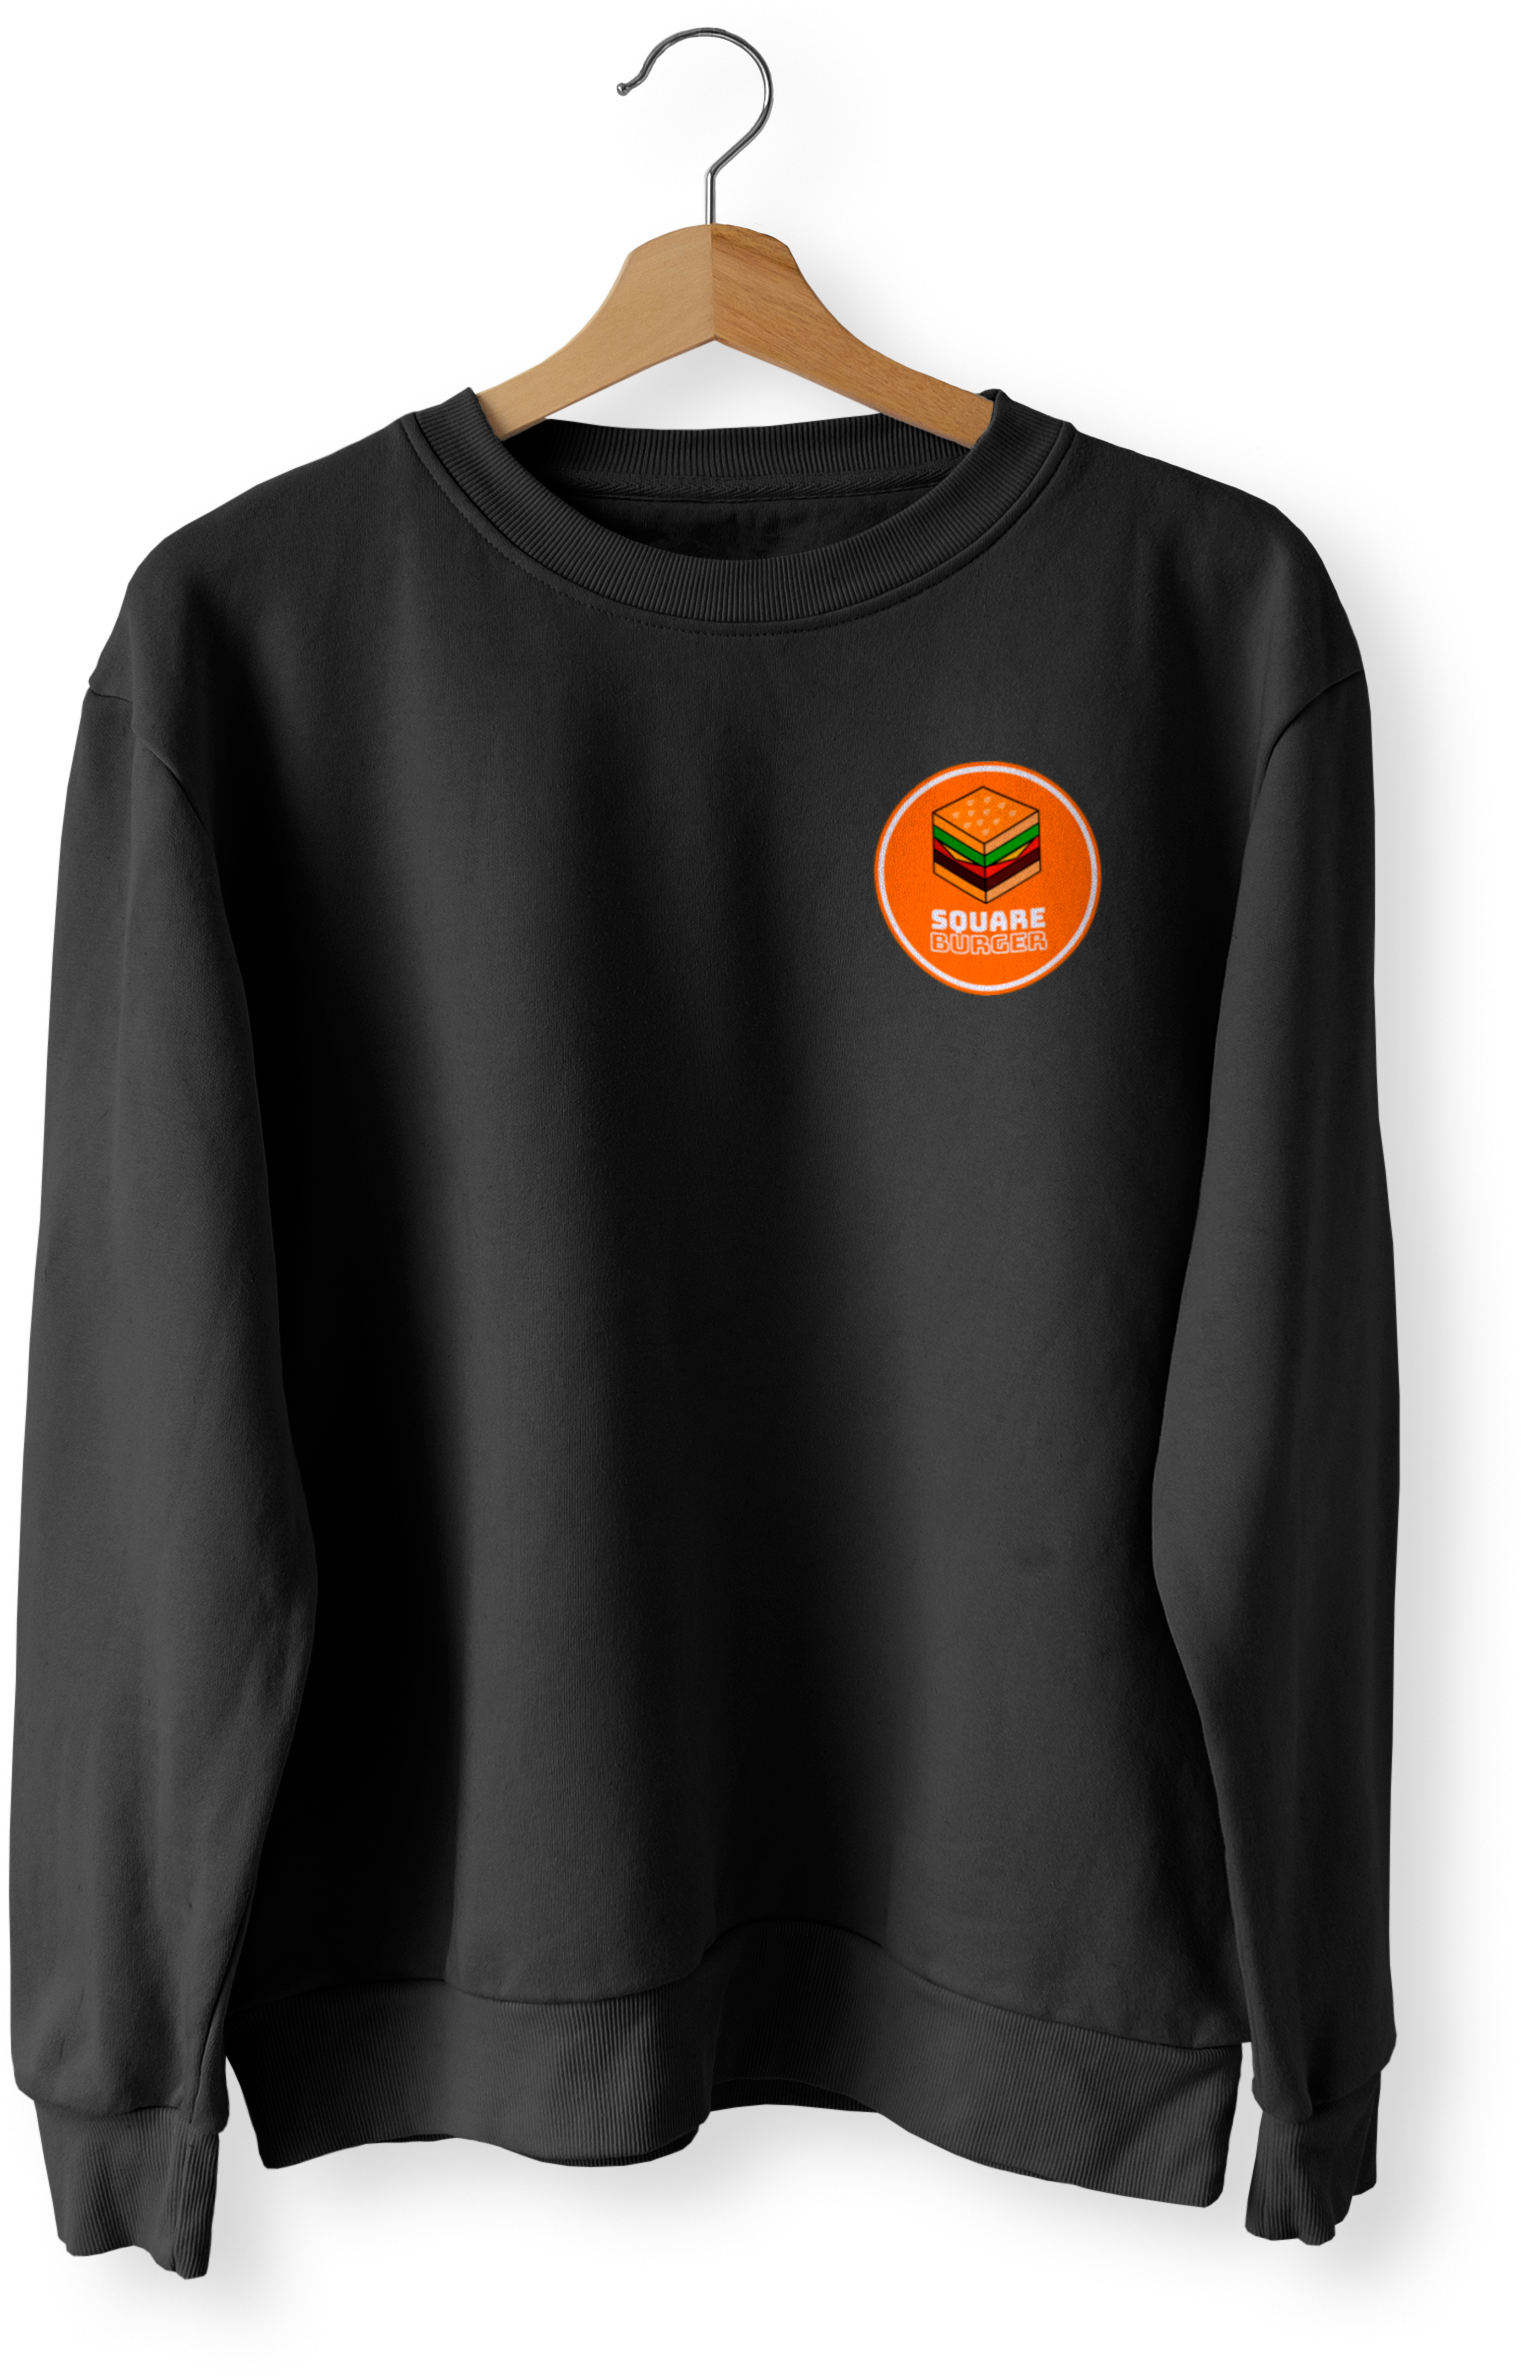 The front of a black sweatshirt with the Square Burger logo on the front.